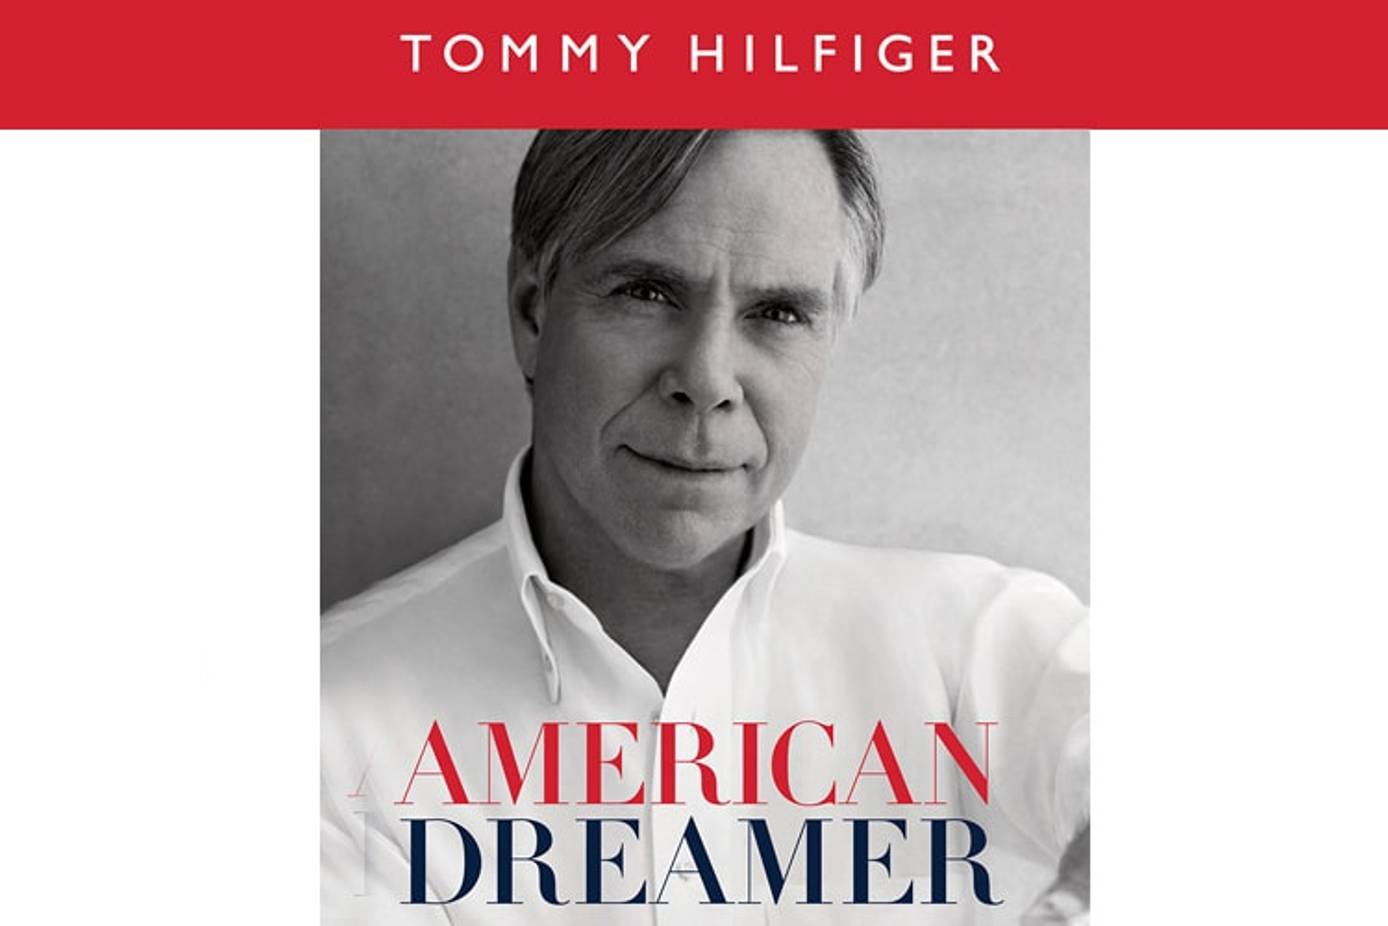 dukke Skråstreg parti Tommy Hilfiger says you have to be disruptive to succeed